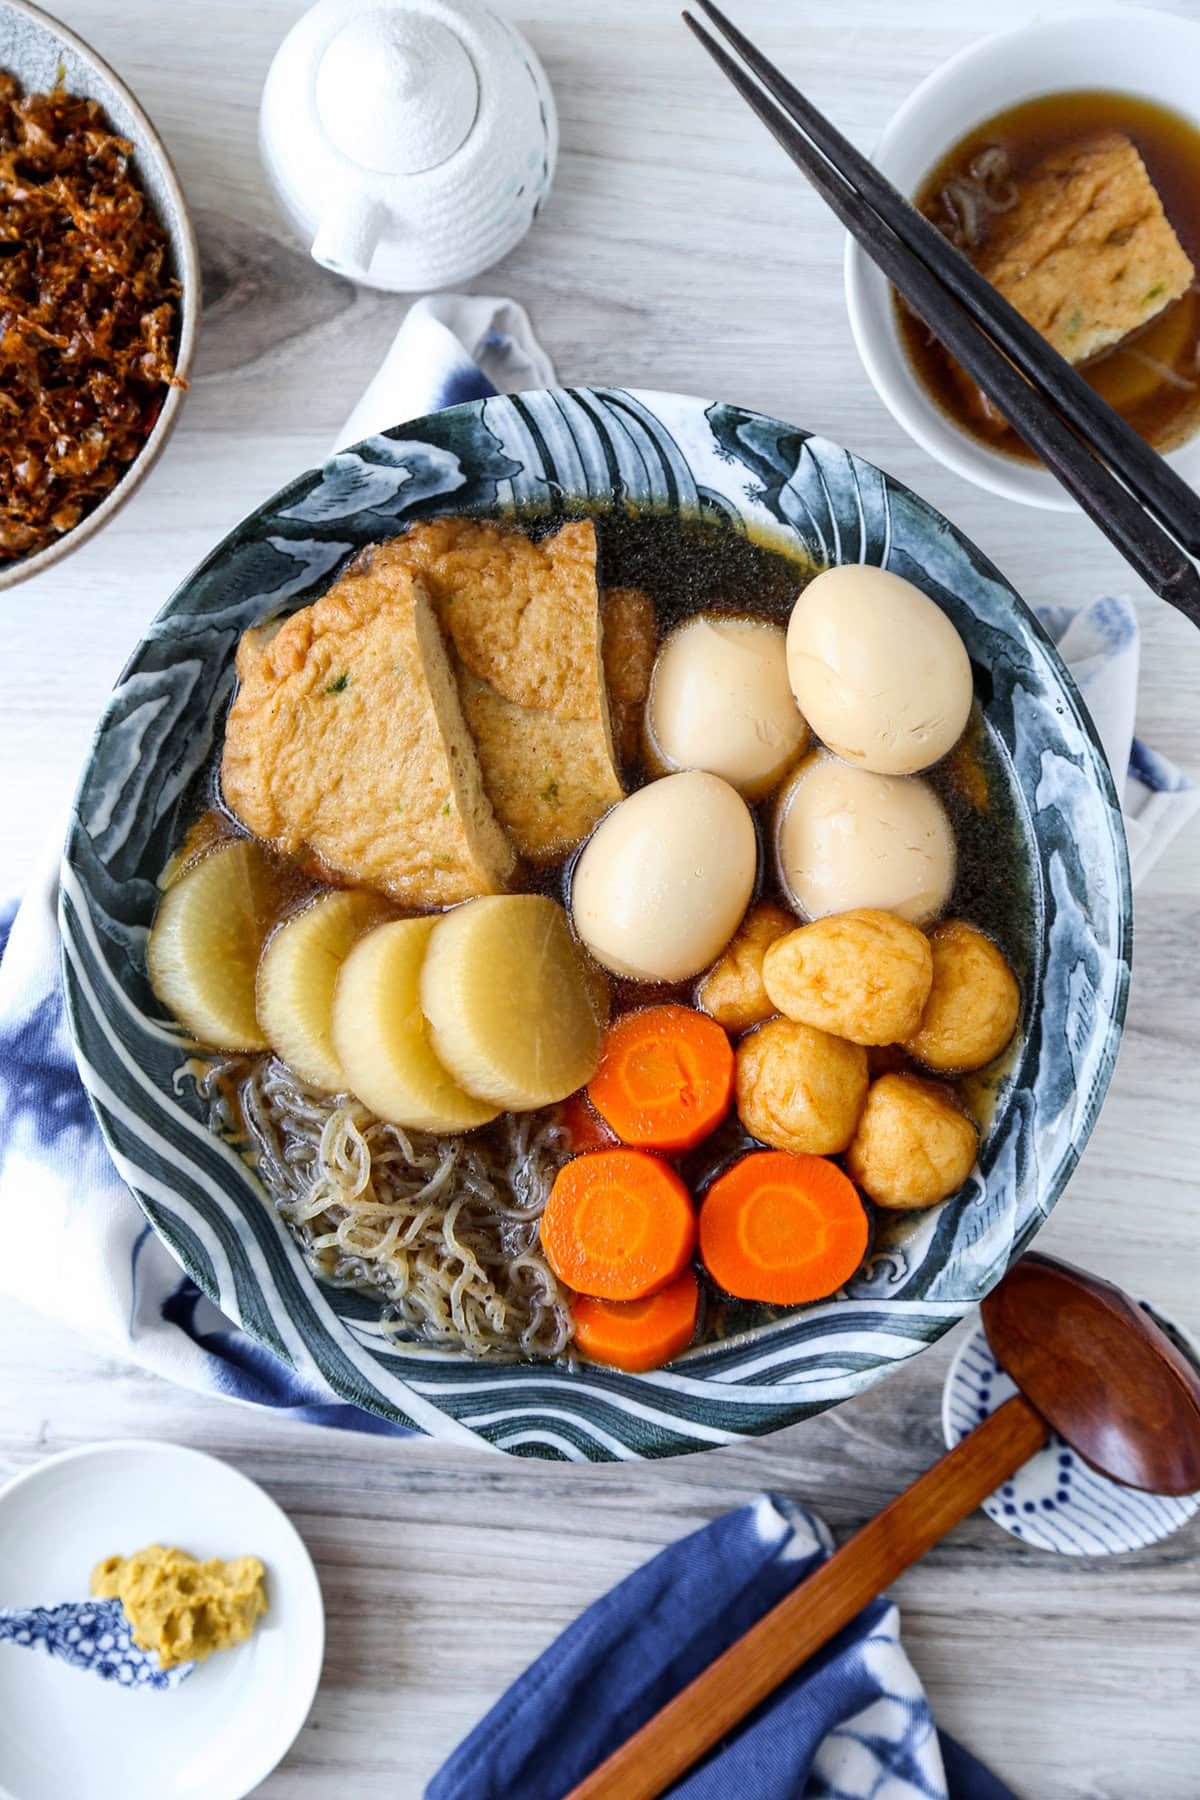 How To Cook Simple Oden and Mala Oden (Fish Cake Stew)